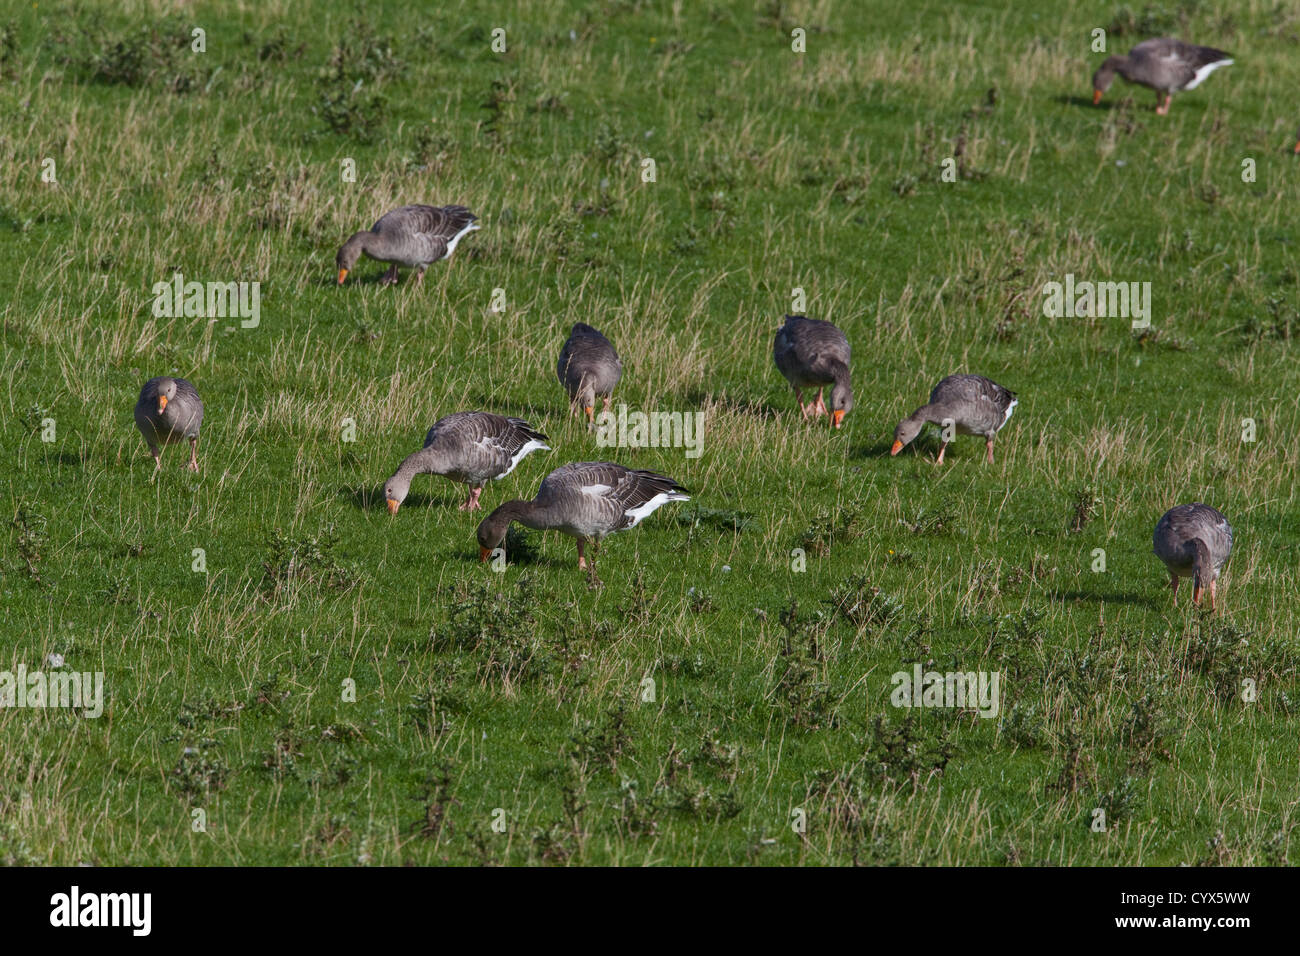 Greylag Geese (Anser anser). Big bills in action. Grazing, selectively, from sheep grazed sward. Genuine wild birds on Iona. Stock Photo